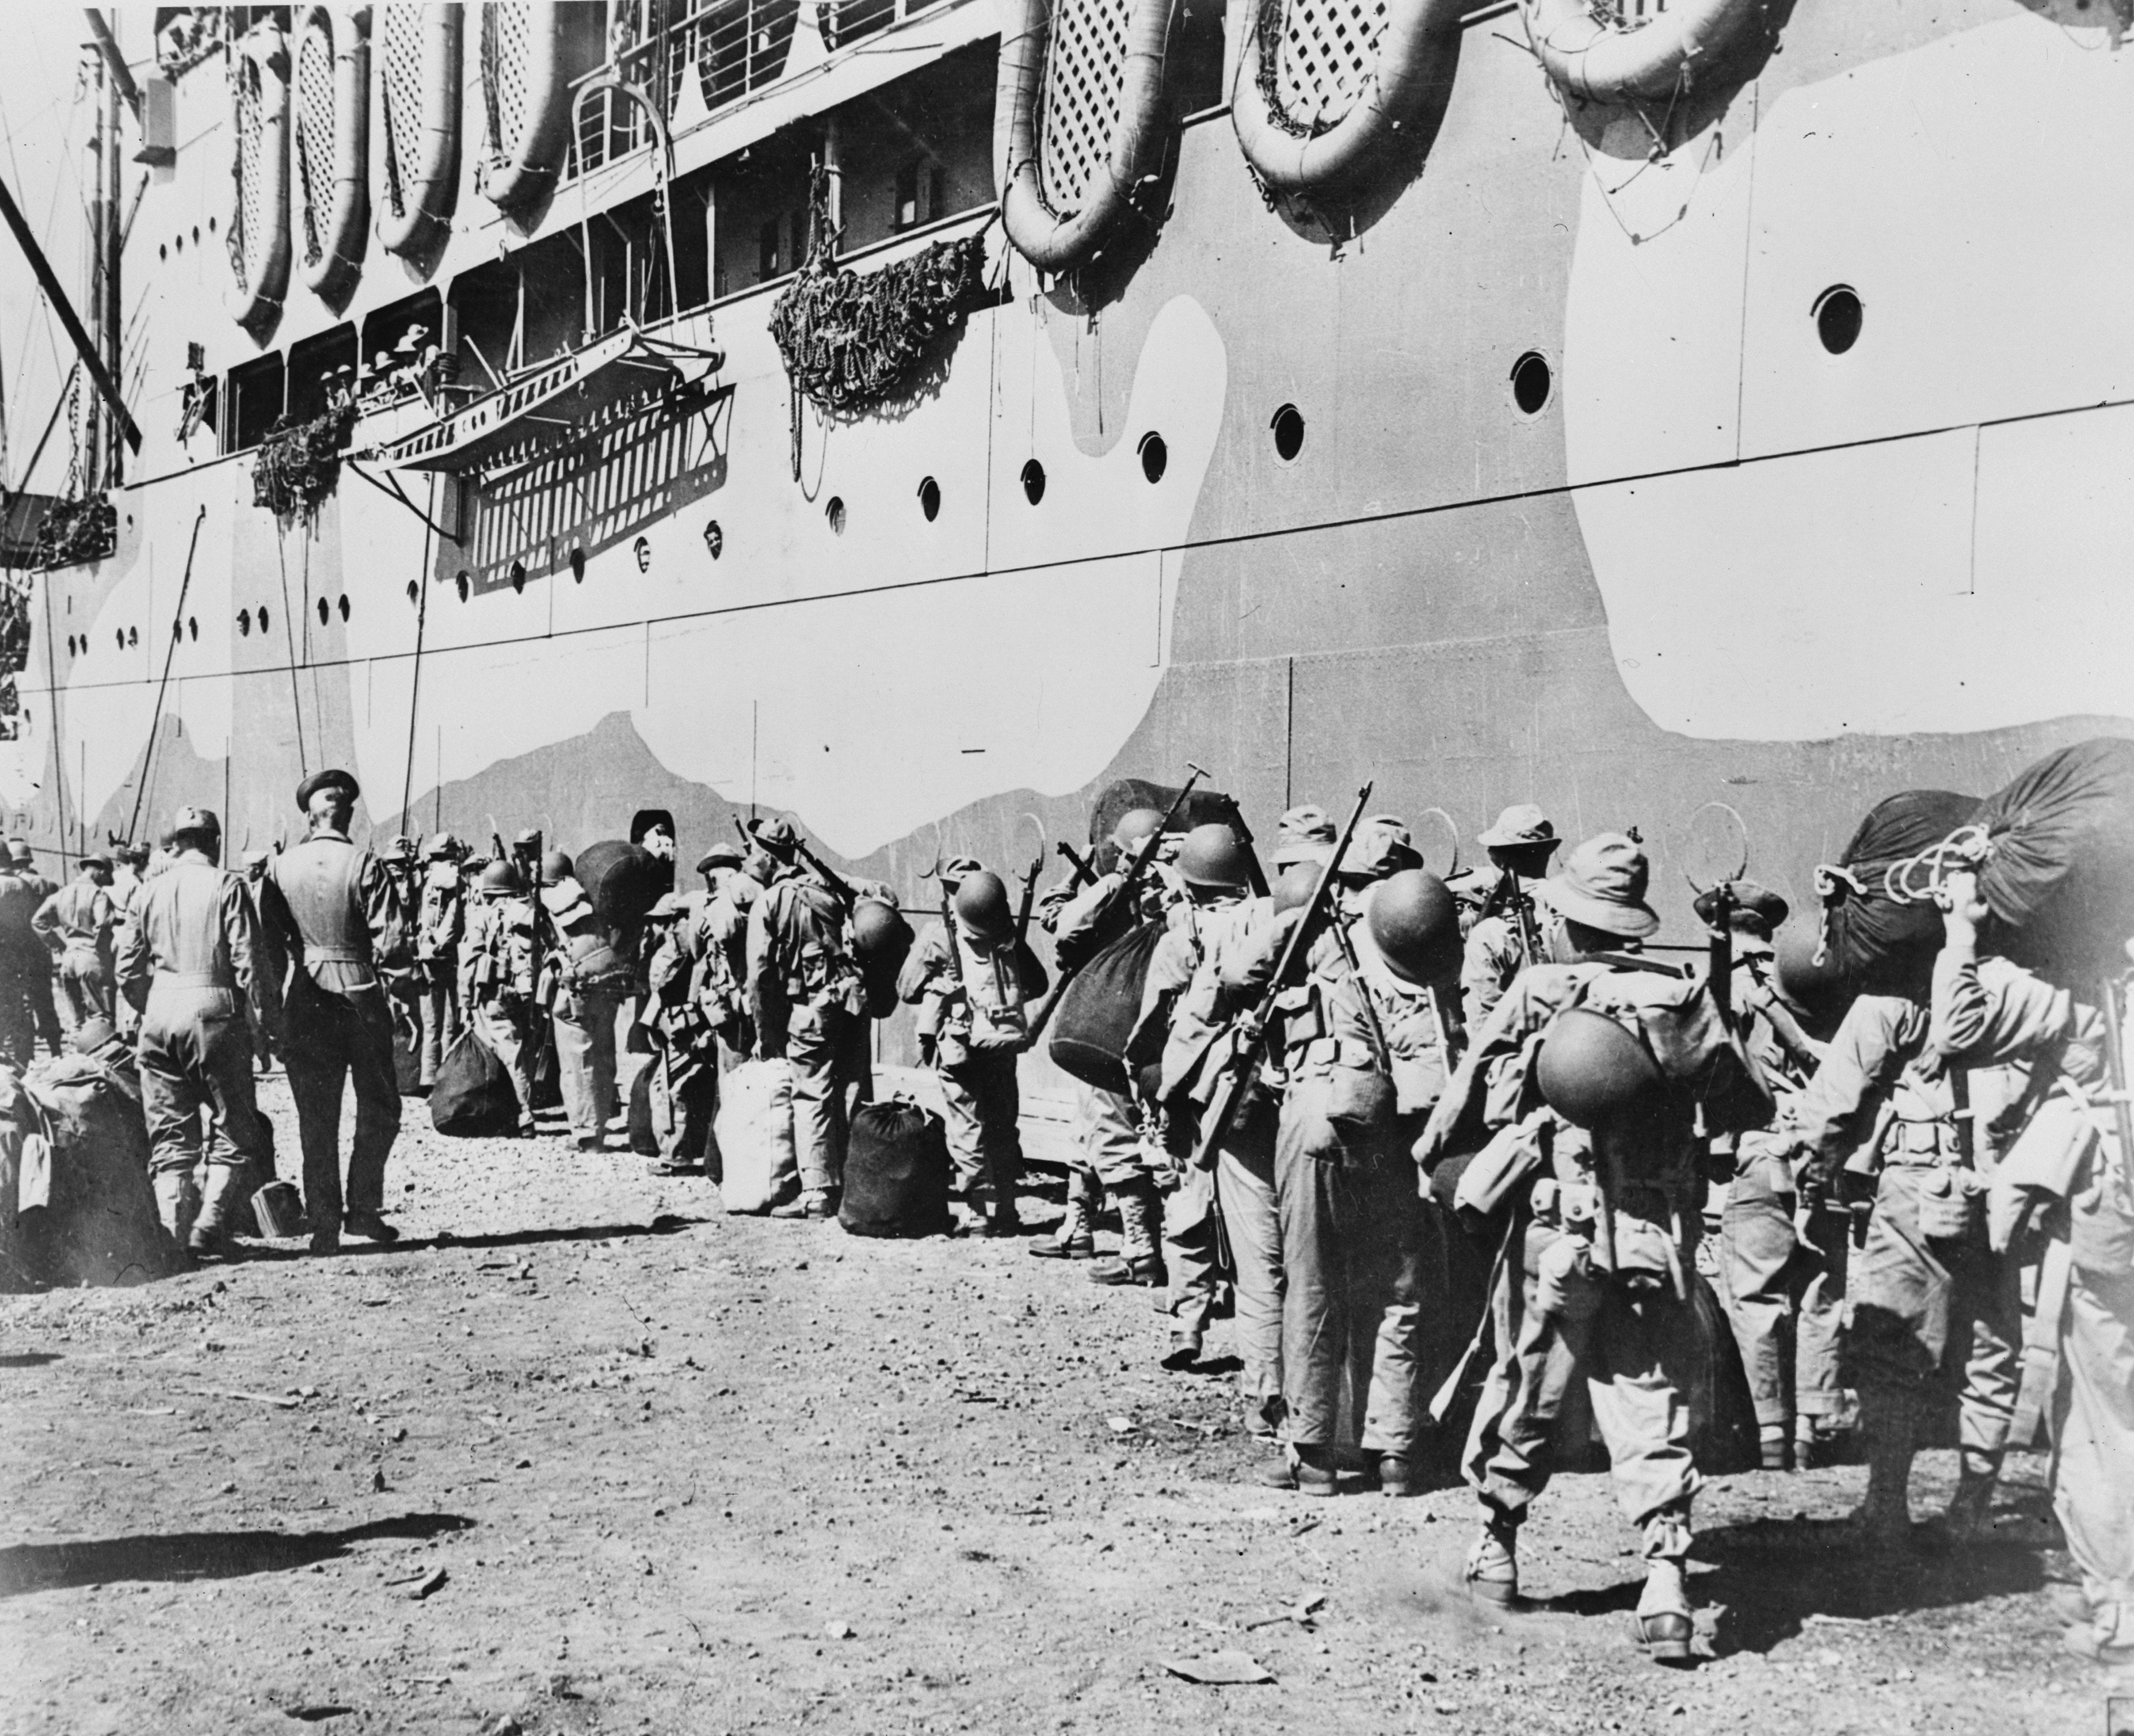 American troops boarding a transport which will take them from New Caledonia to the Solomon Islands battlefront